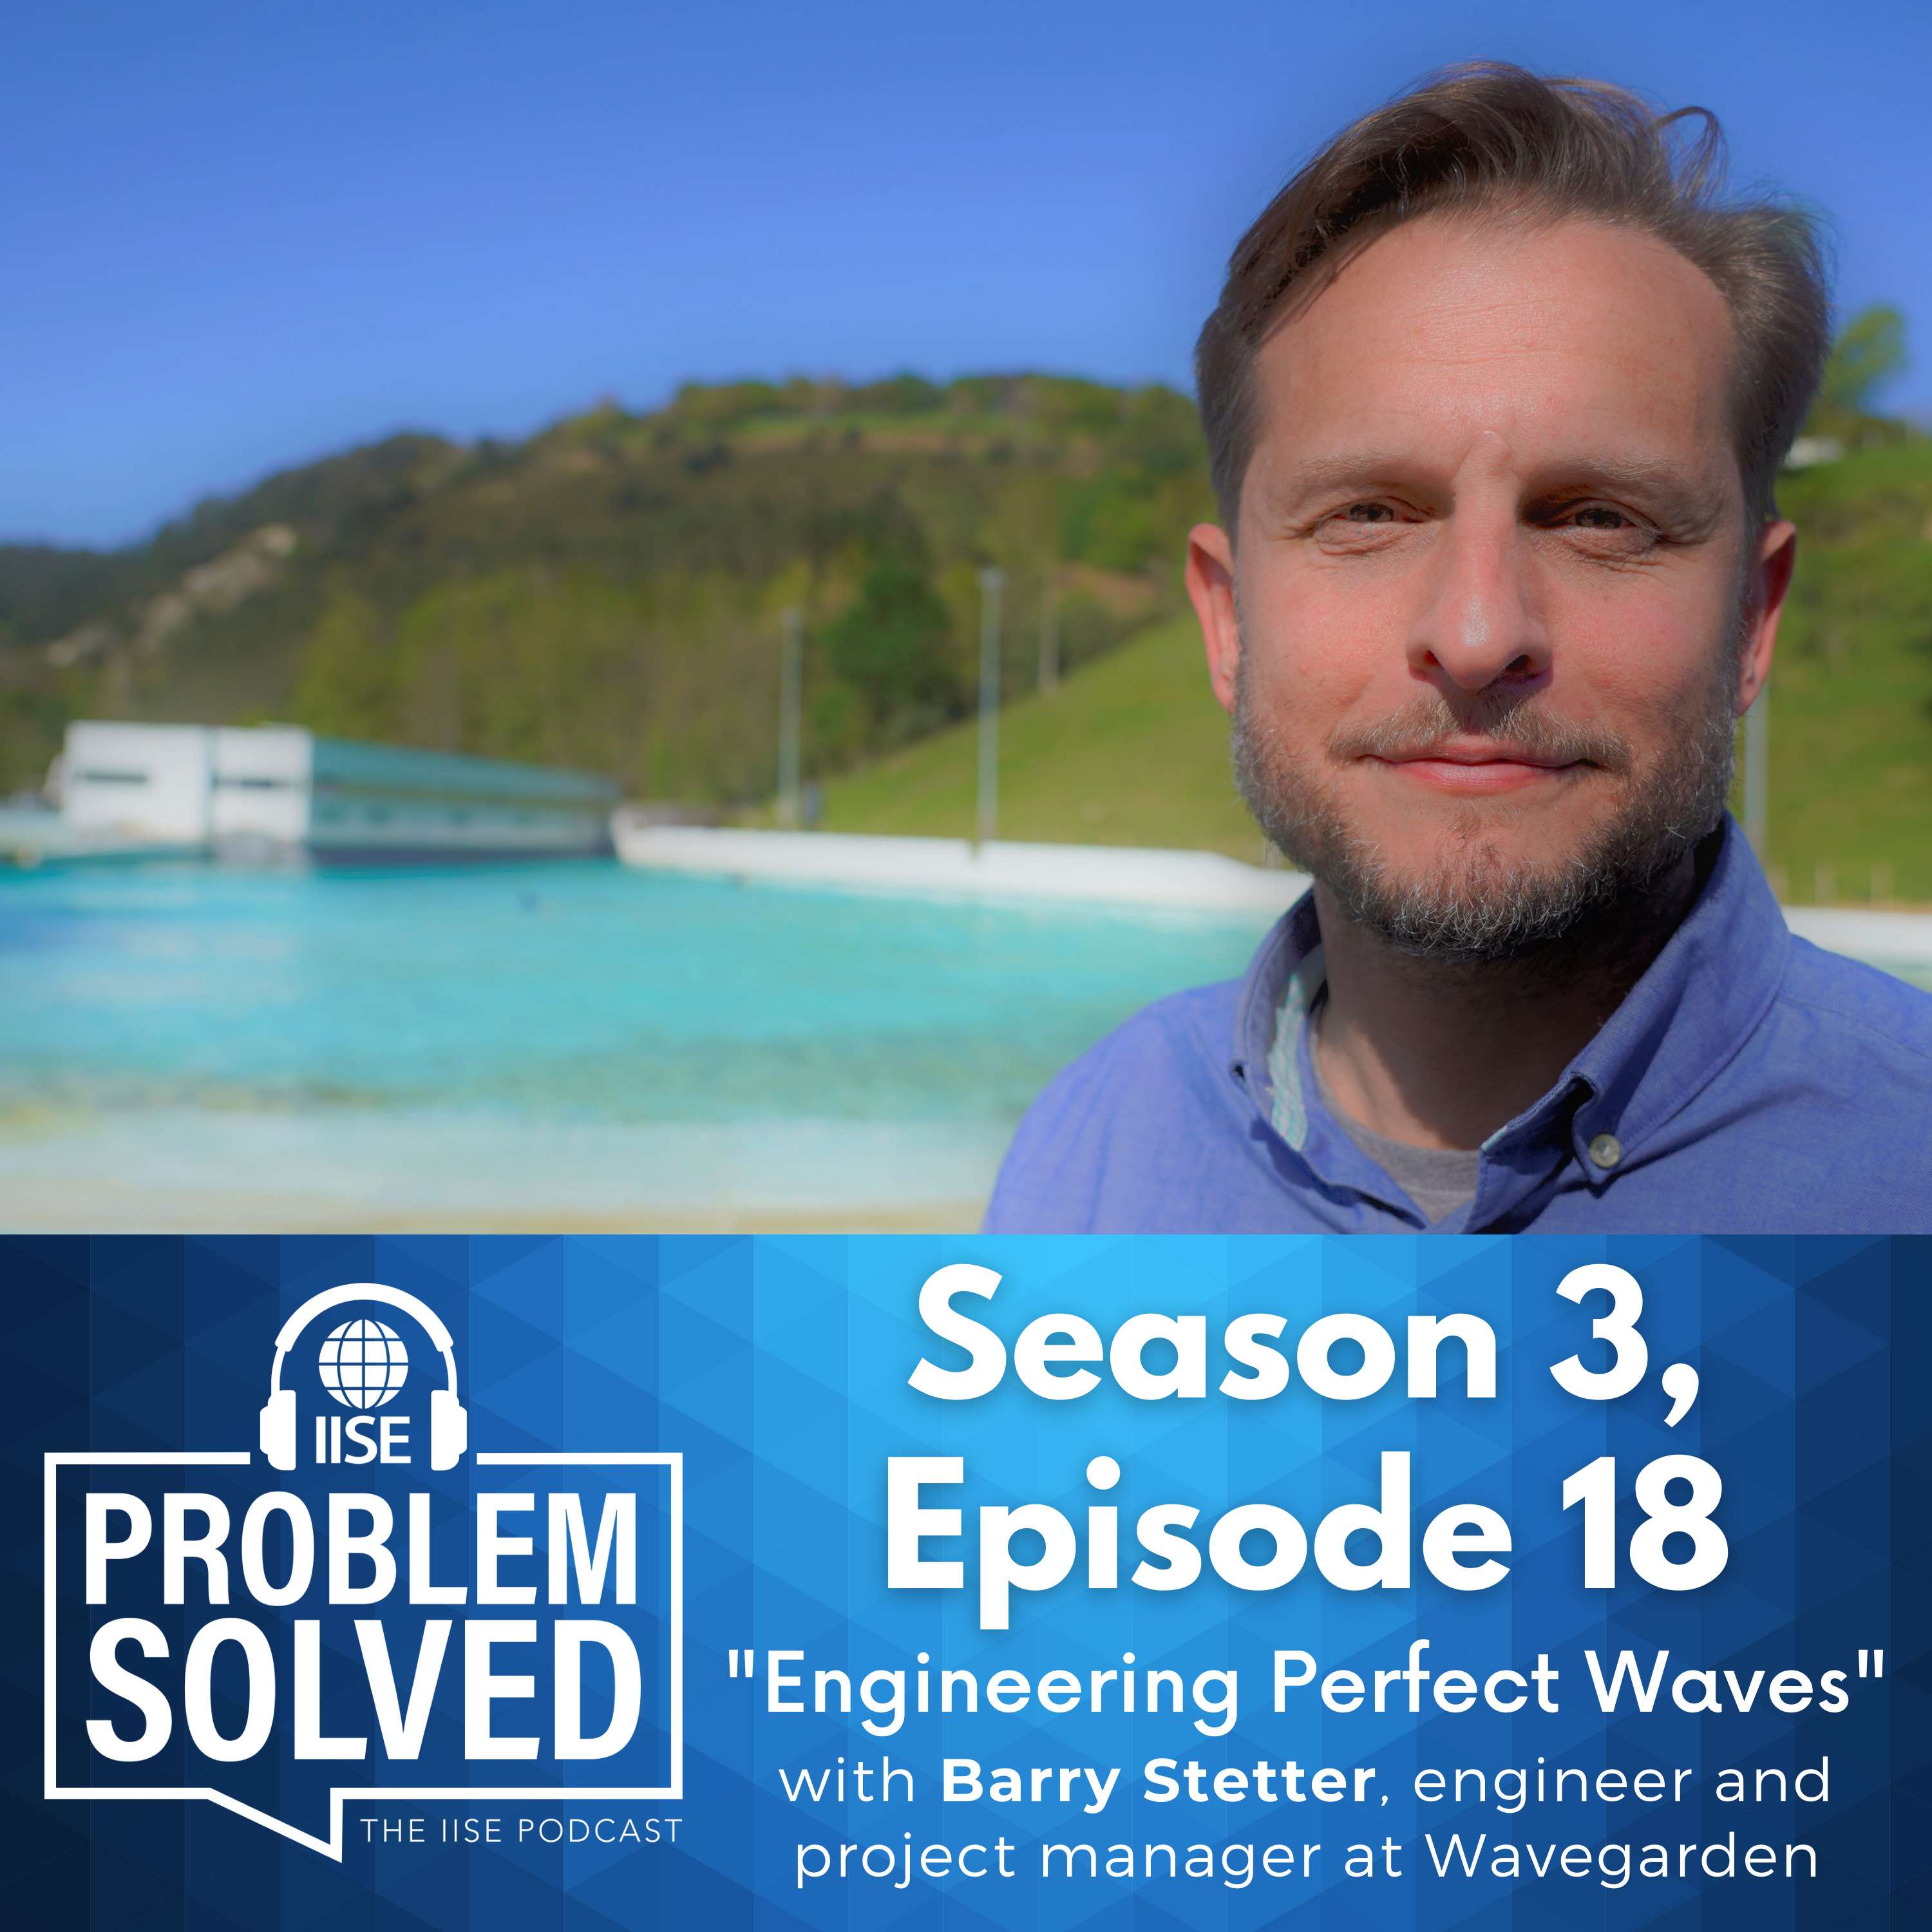 Engineering Perfect Waves with Barry Stetter